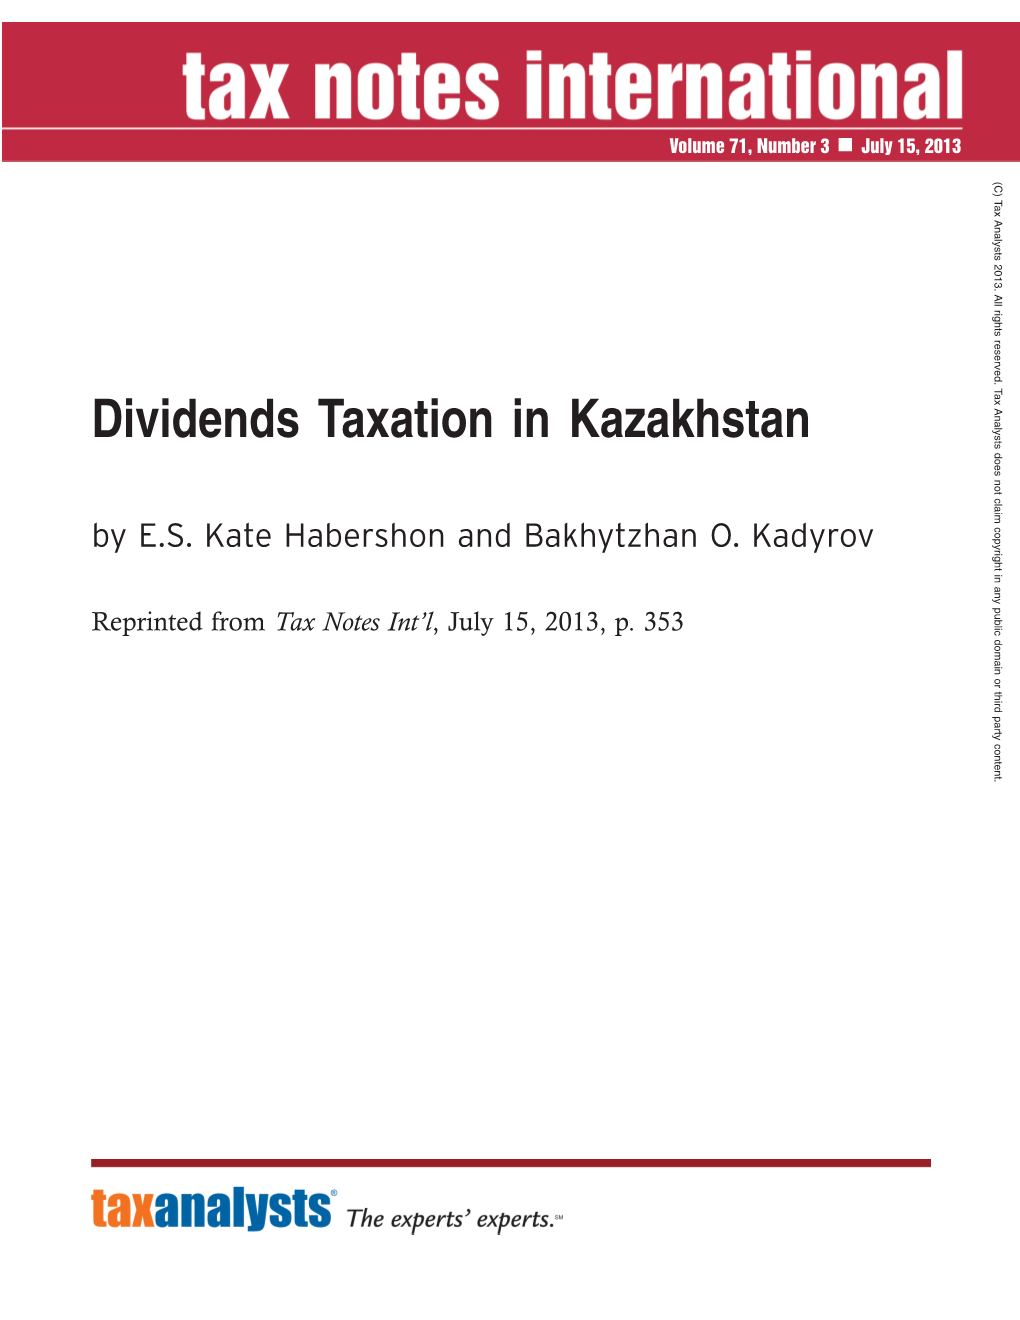 Dividends Taxation in Kazakhstan by E.S